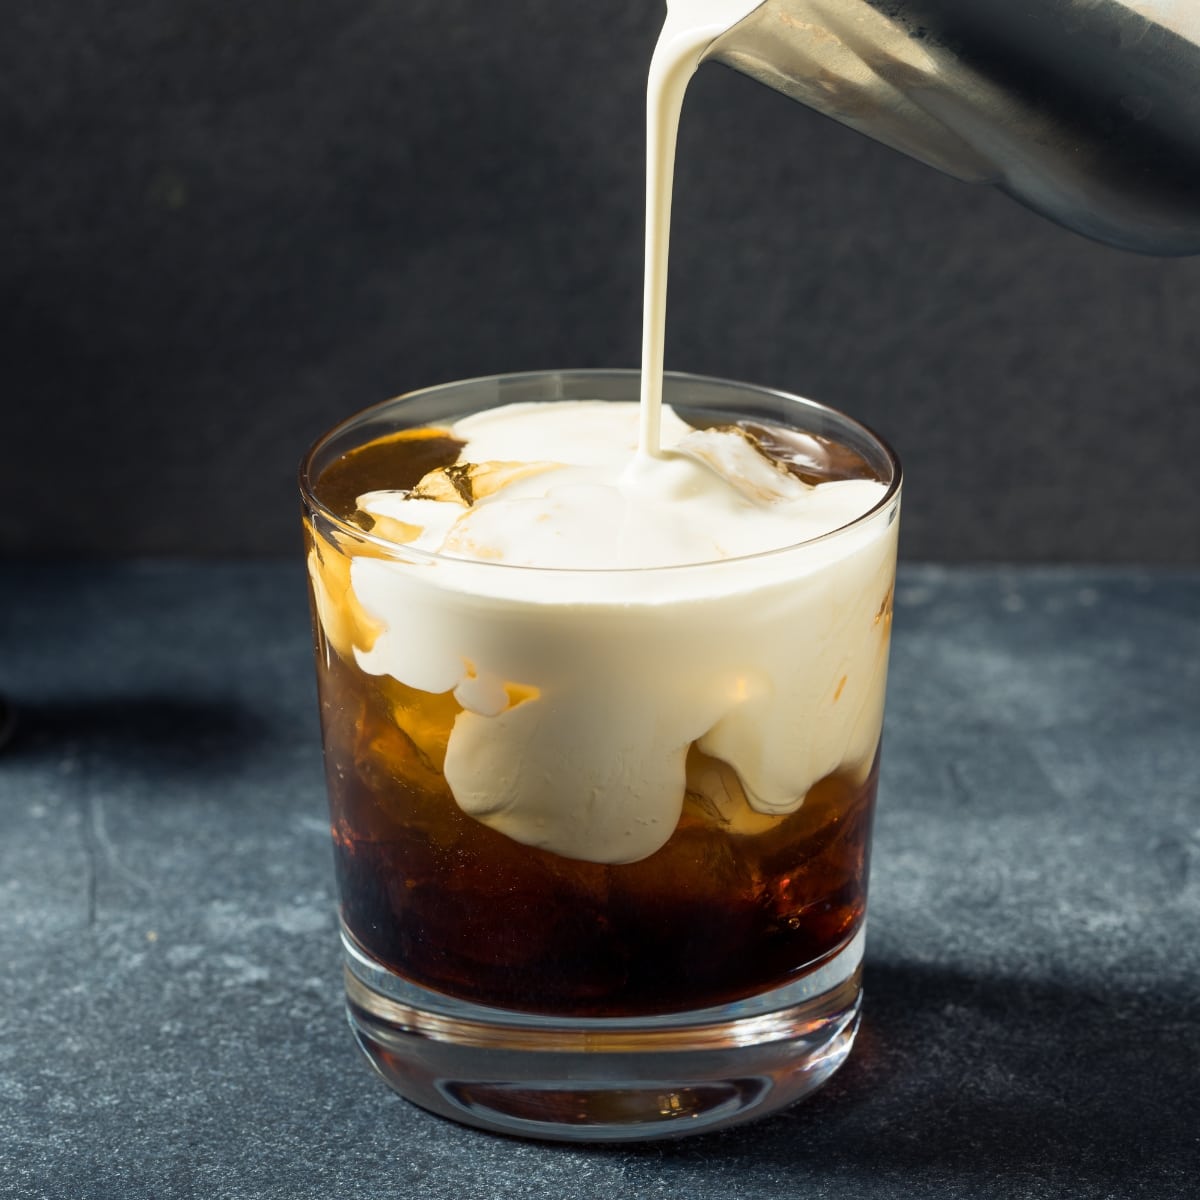 Cream Pouring on Vodka To Make a White Russian Cocktail